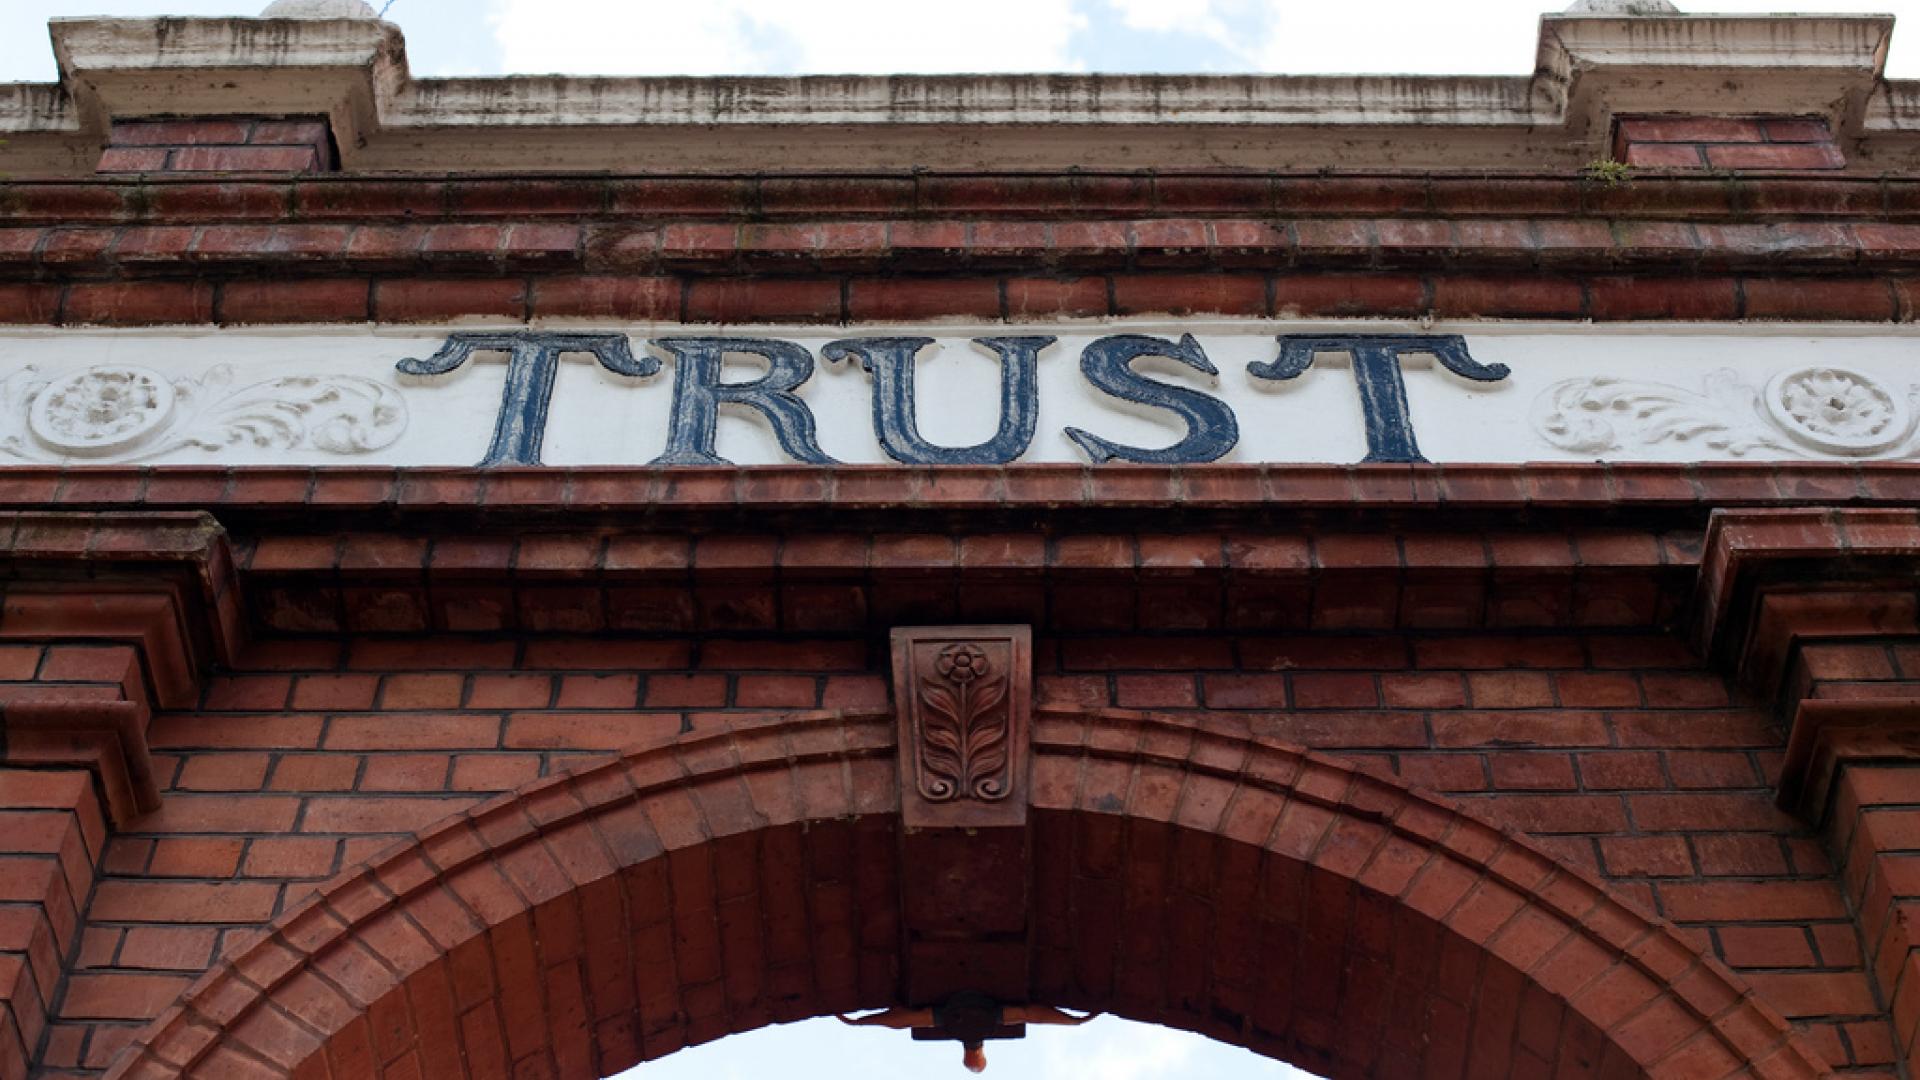 Image of arch with trust written on it